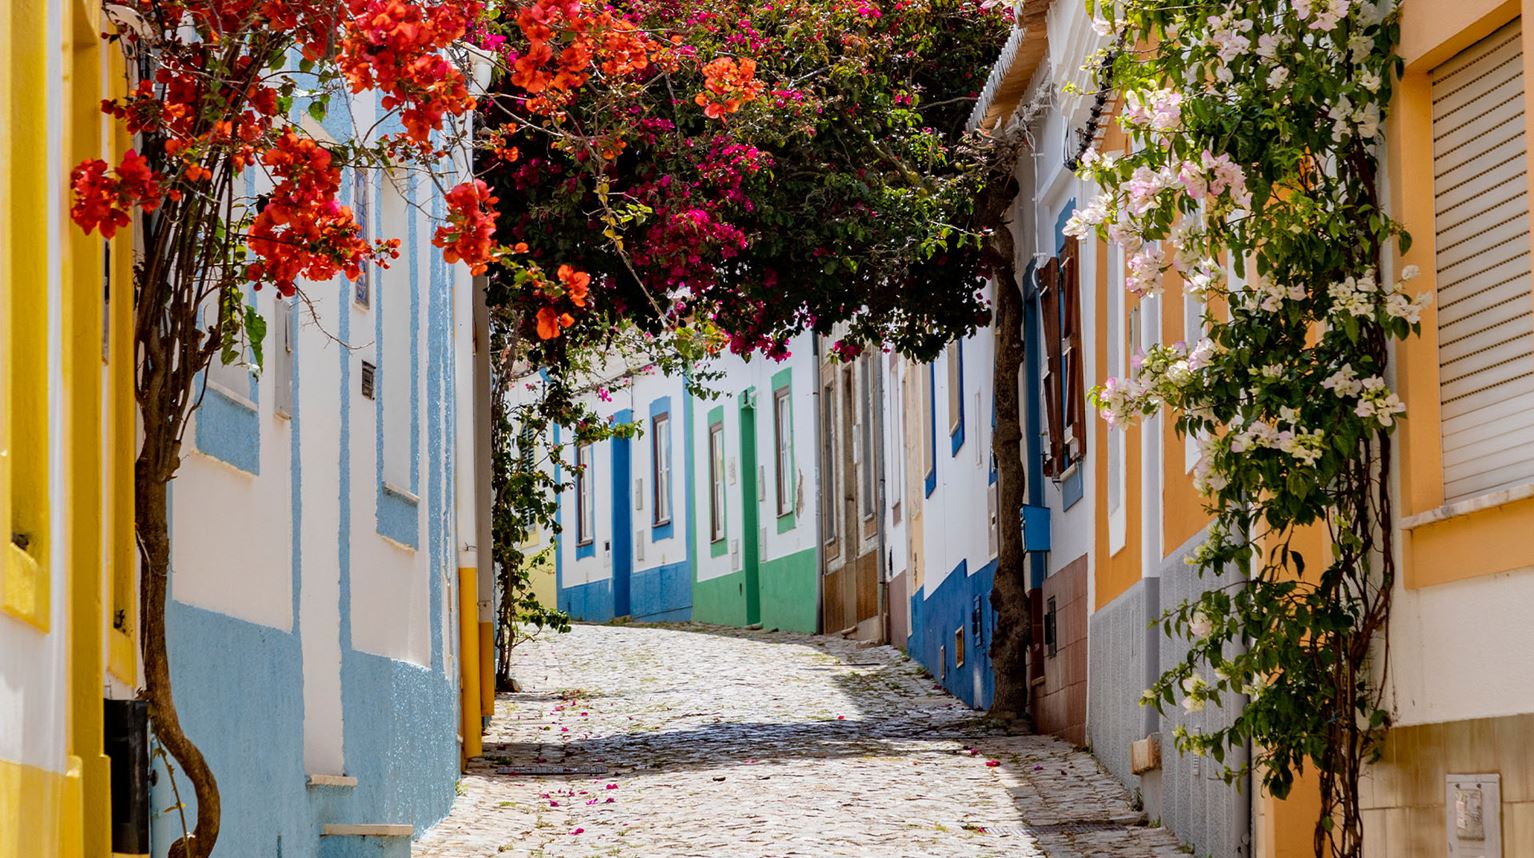 Narrow alley with colourful houses and flowers in Algarve, Portugal